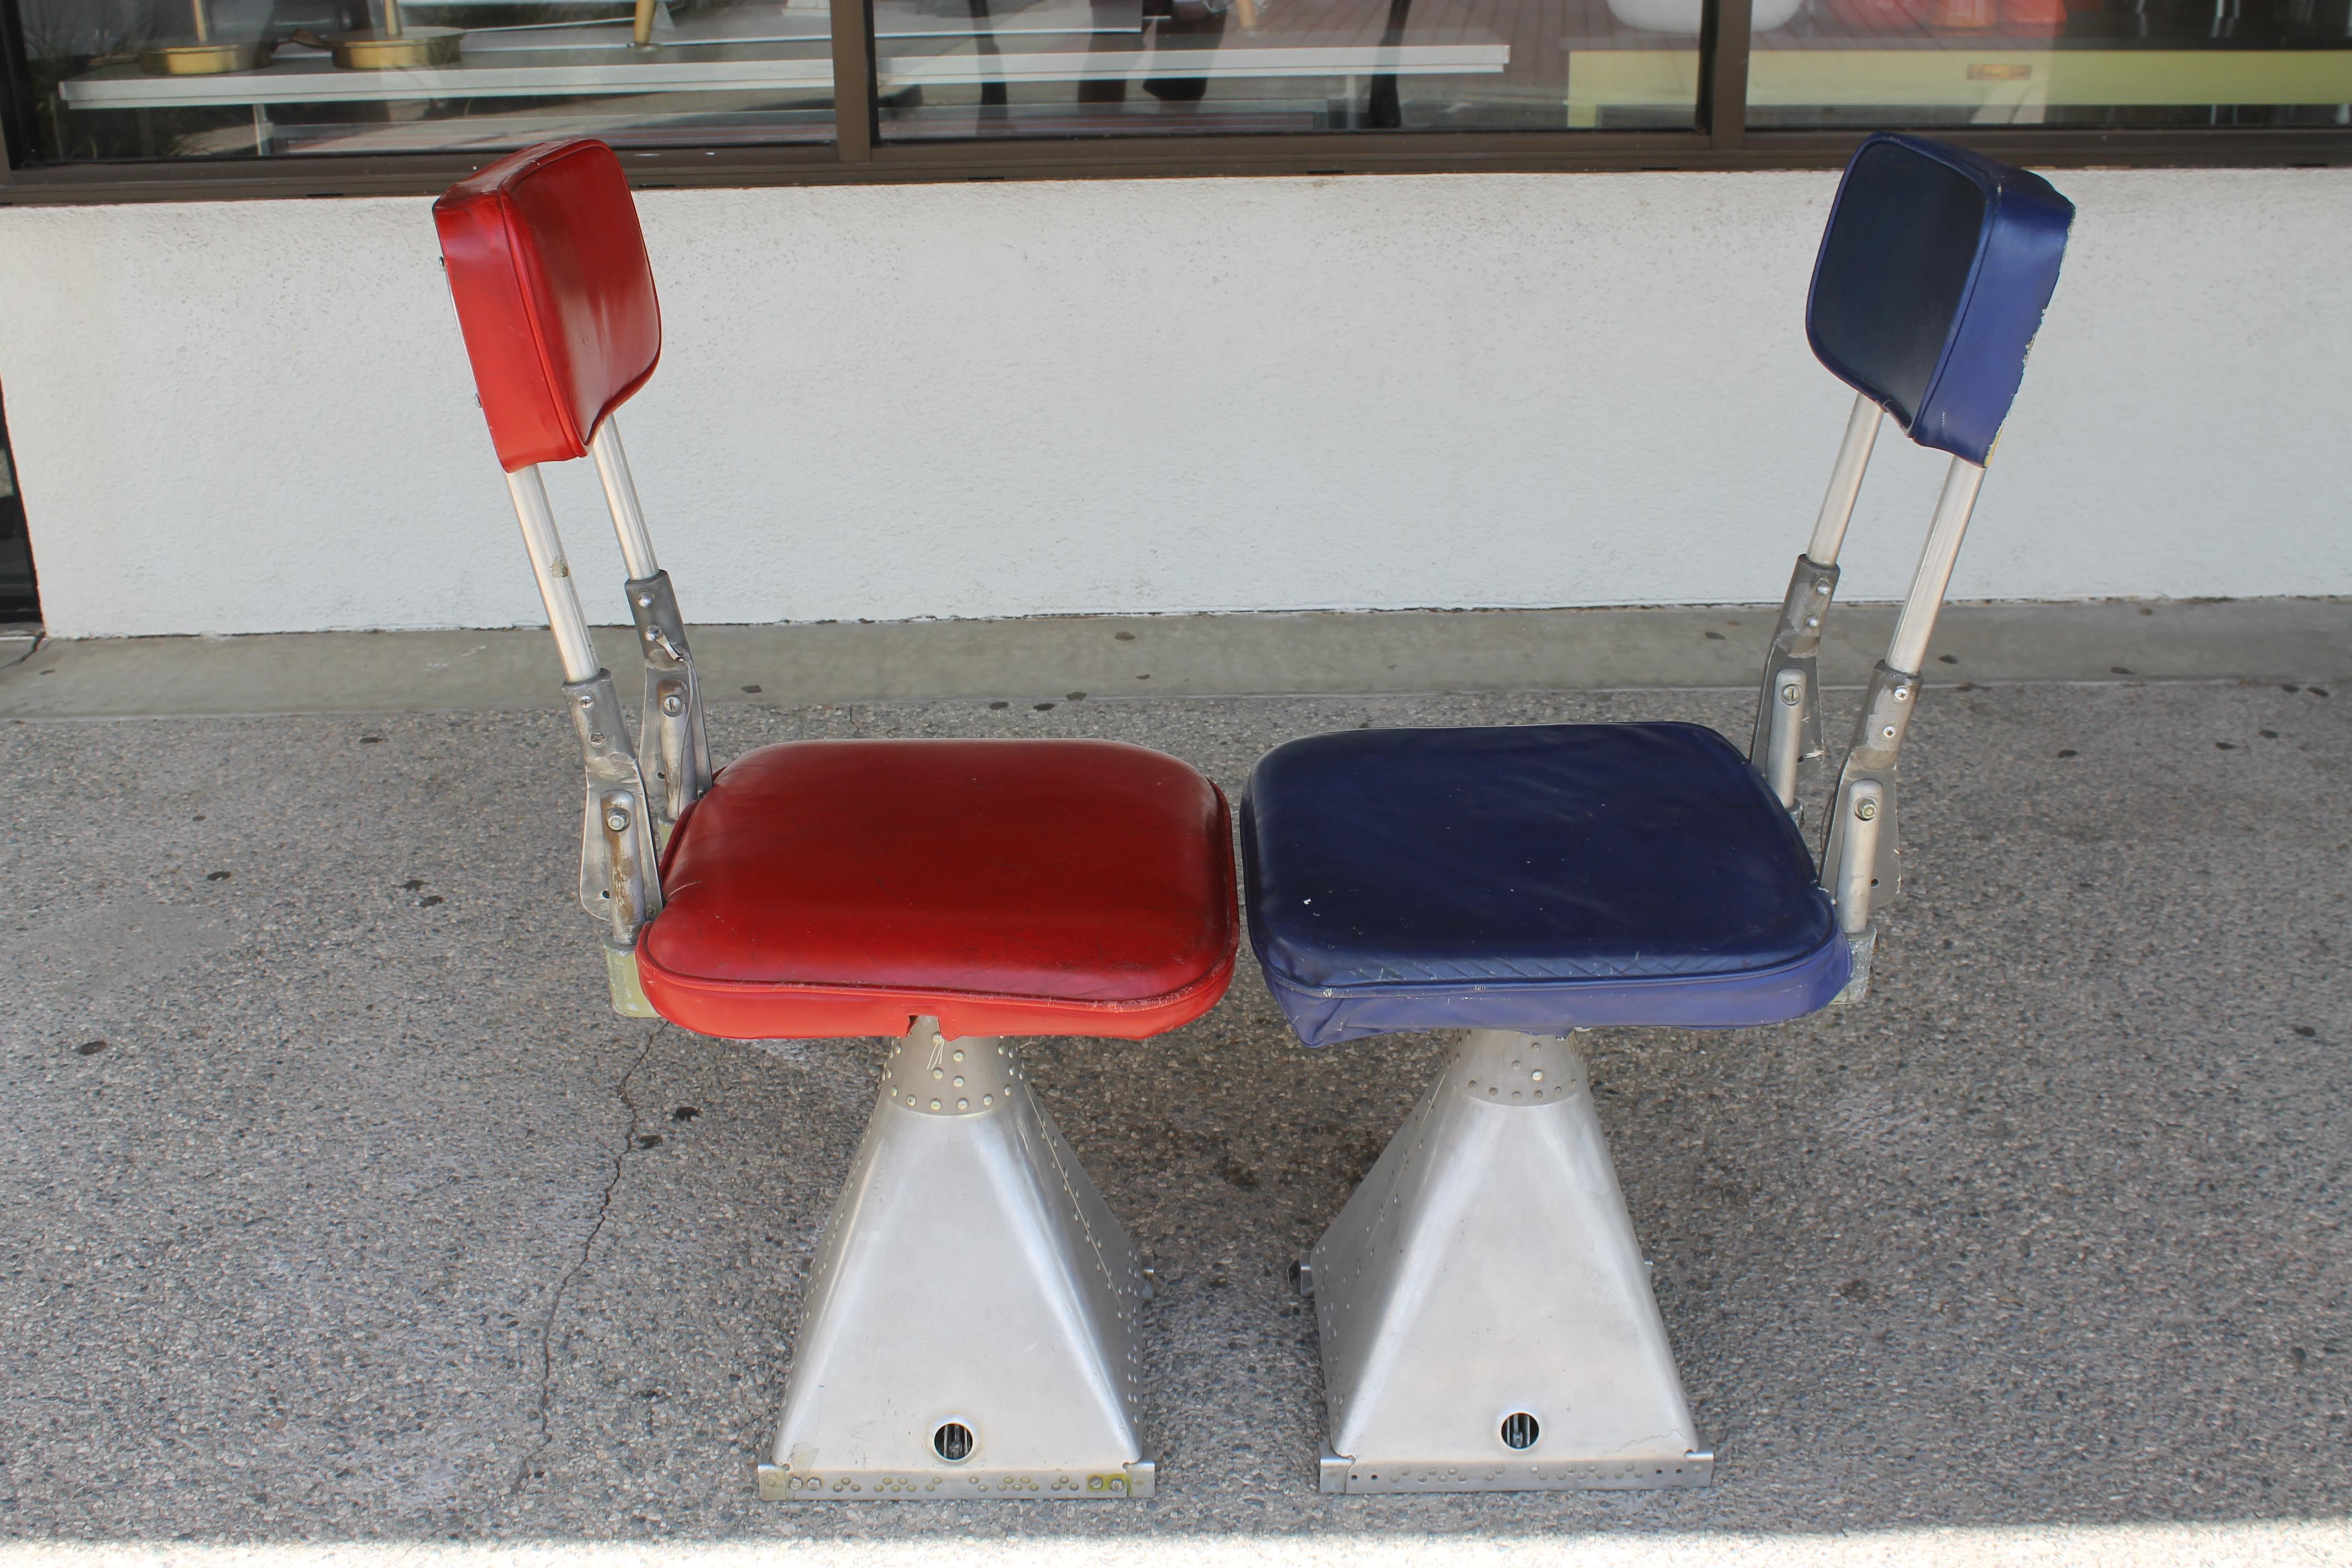 Pair of aluminum machine age airline chairs. Each chair sits on a riveted aluminum base. With cushions upright they measure about 37